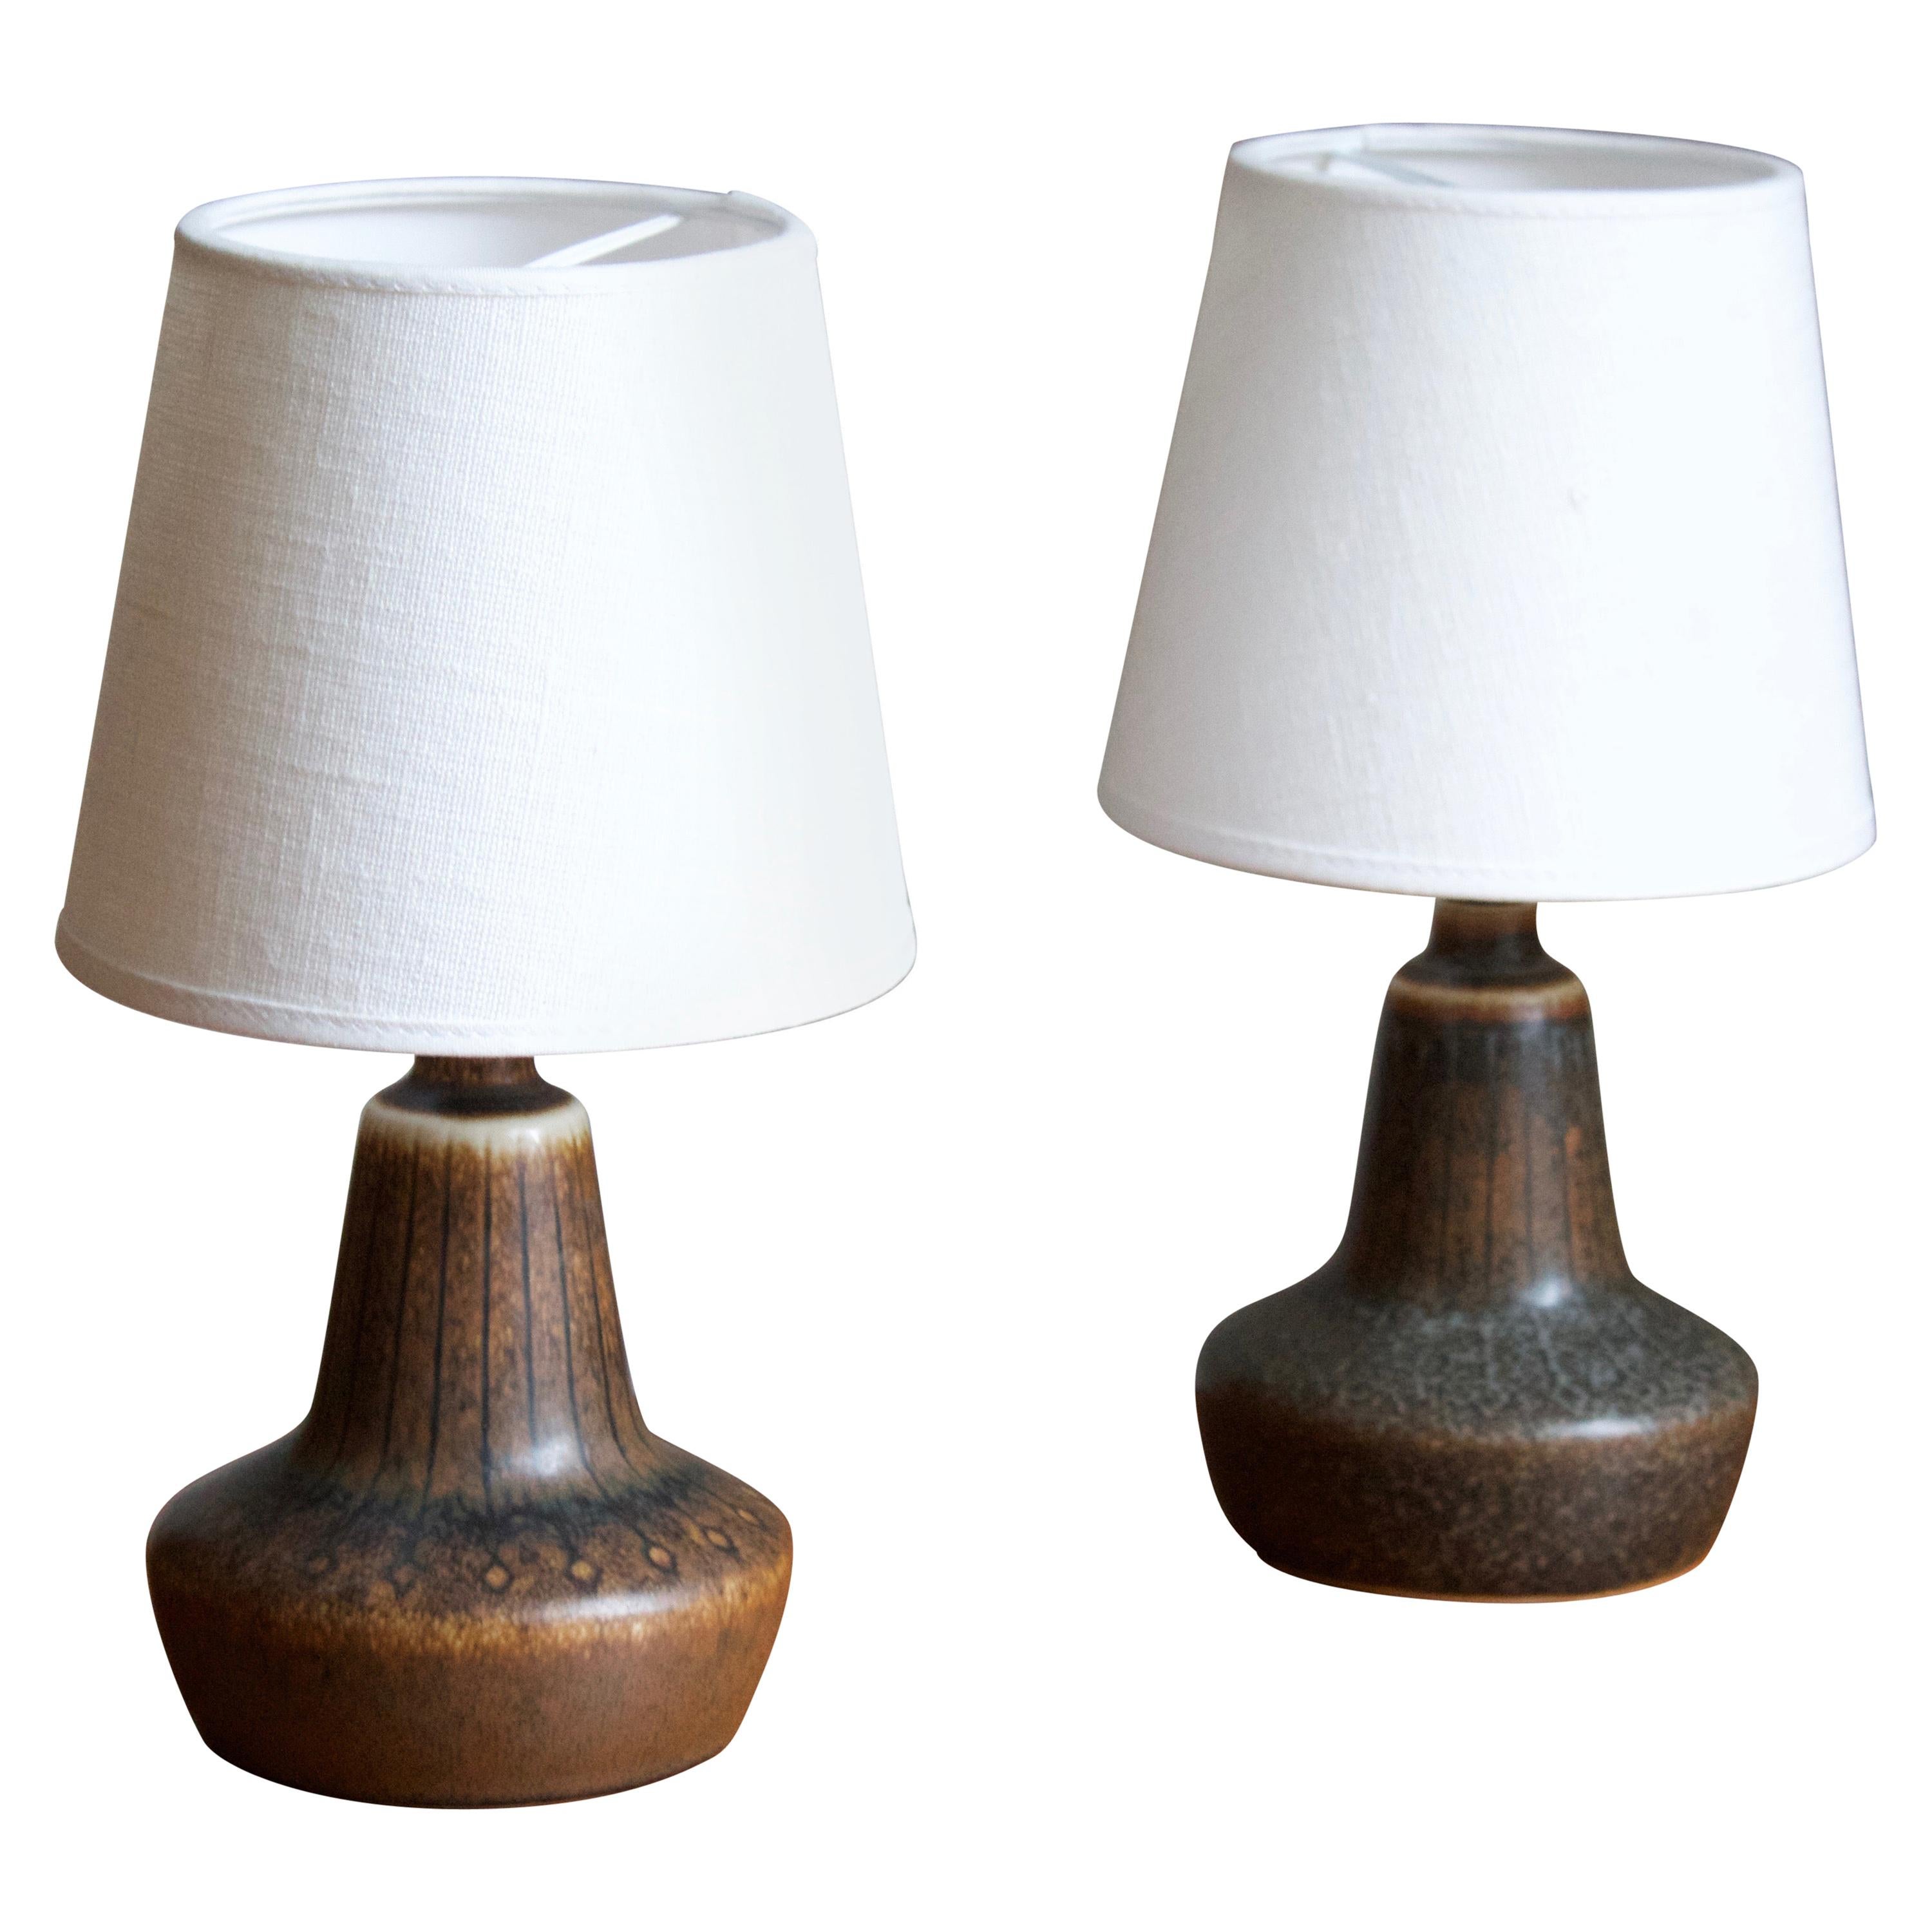 Gunnar Nylund, Small Table Lamps, Glazed Stoneware, Linen Rörstand, Sweden 1950s